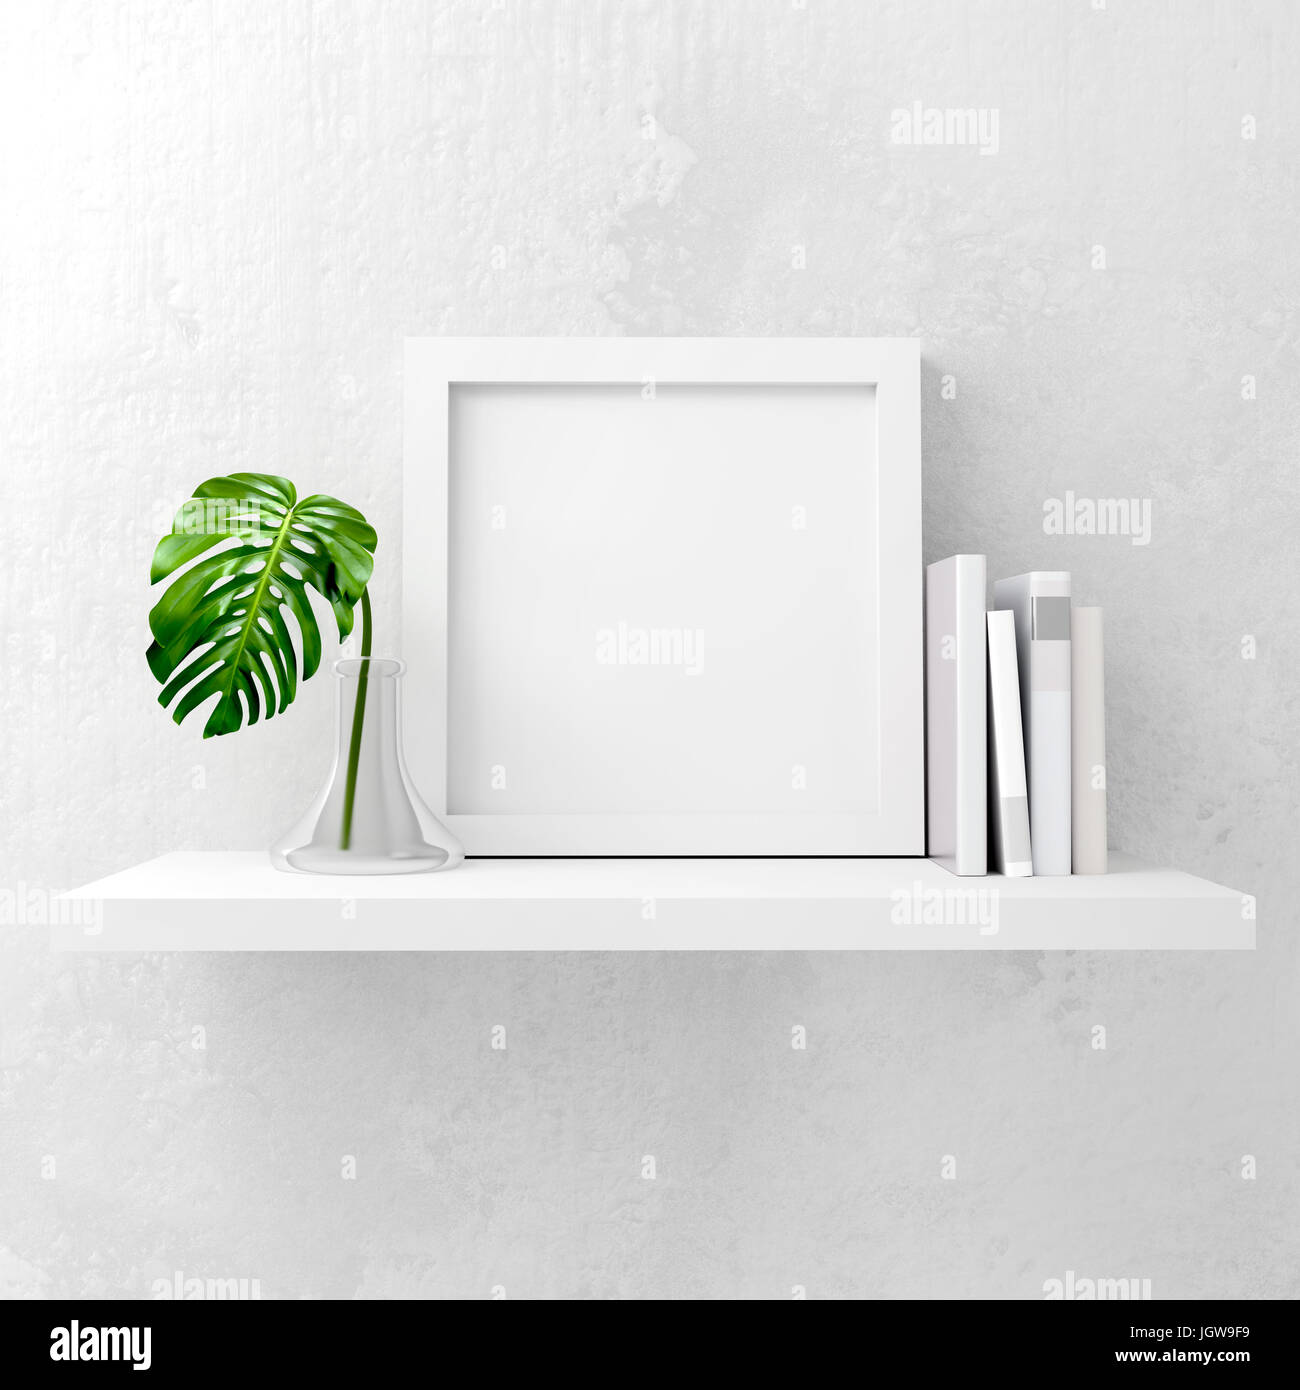 Clean and minimal mock up photo frame with books and green leaf decoration on a white shelf. 3D illustration render. Stock Photo